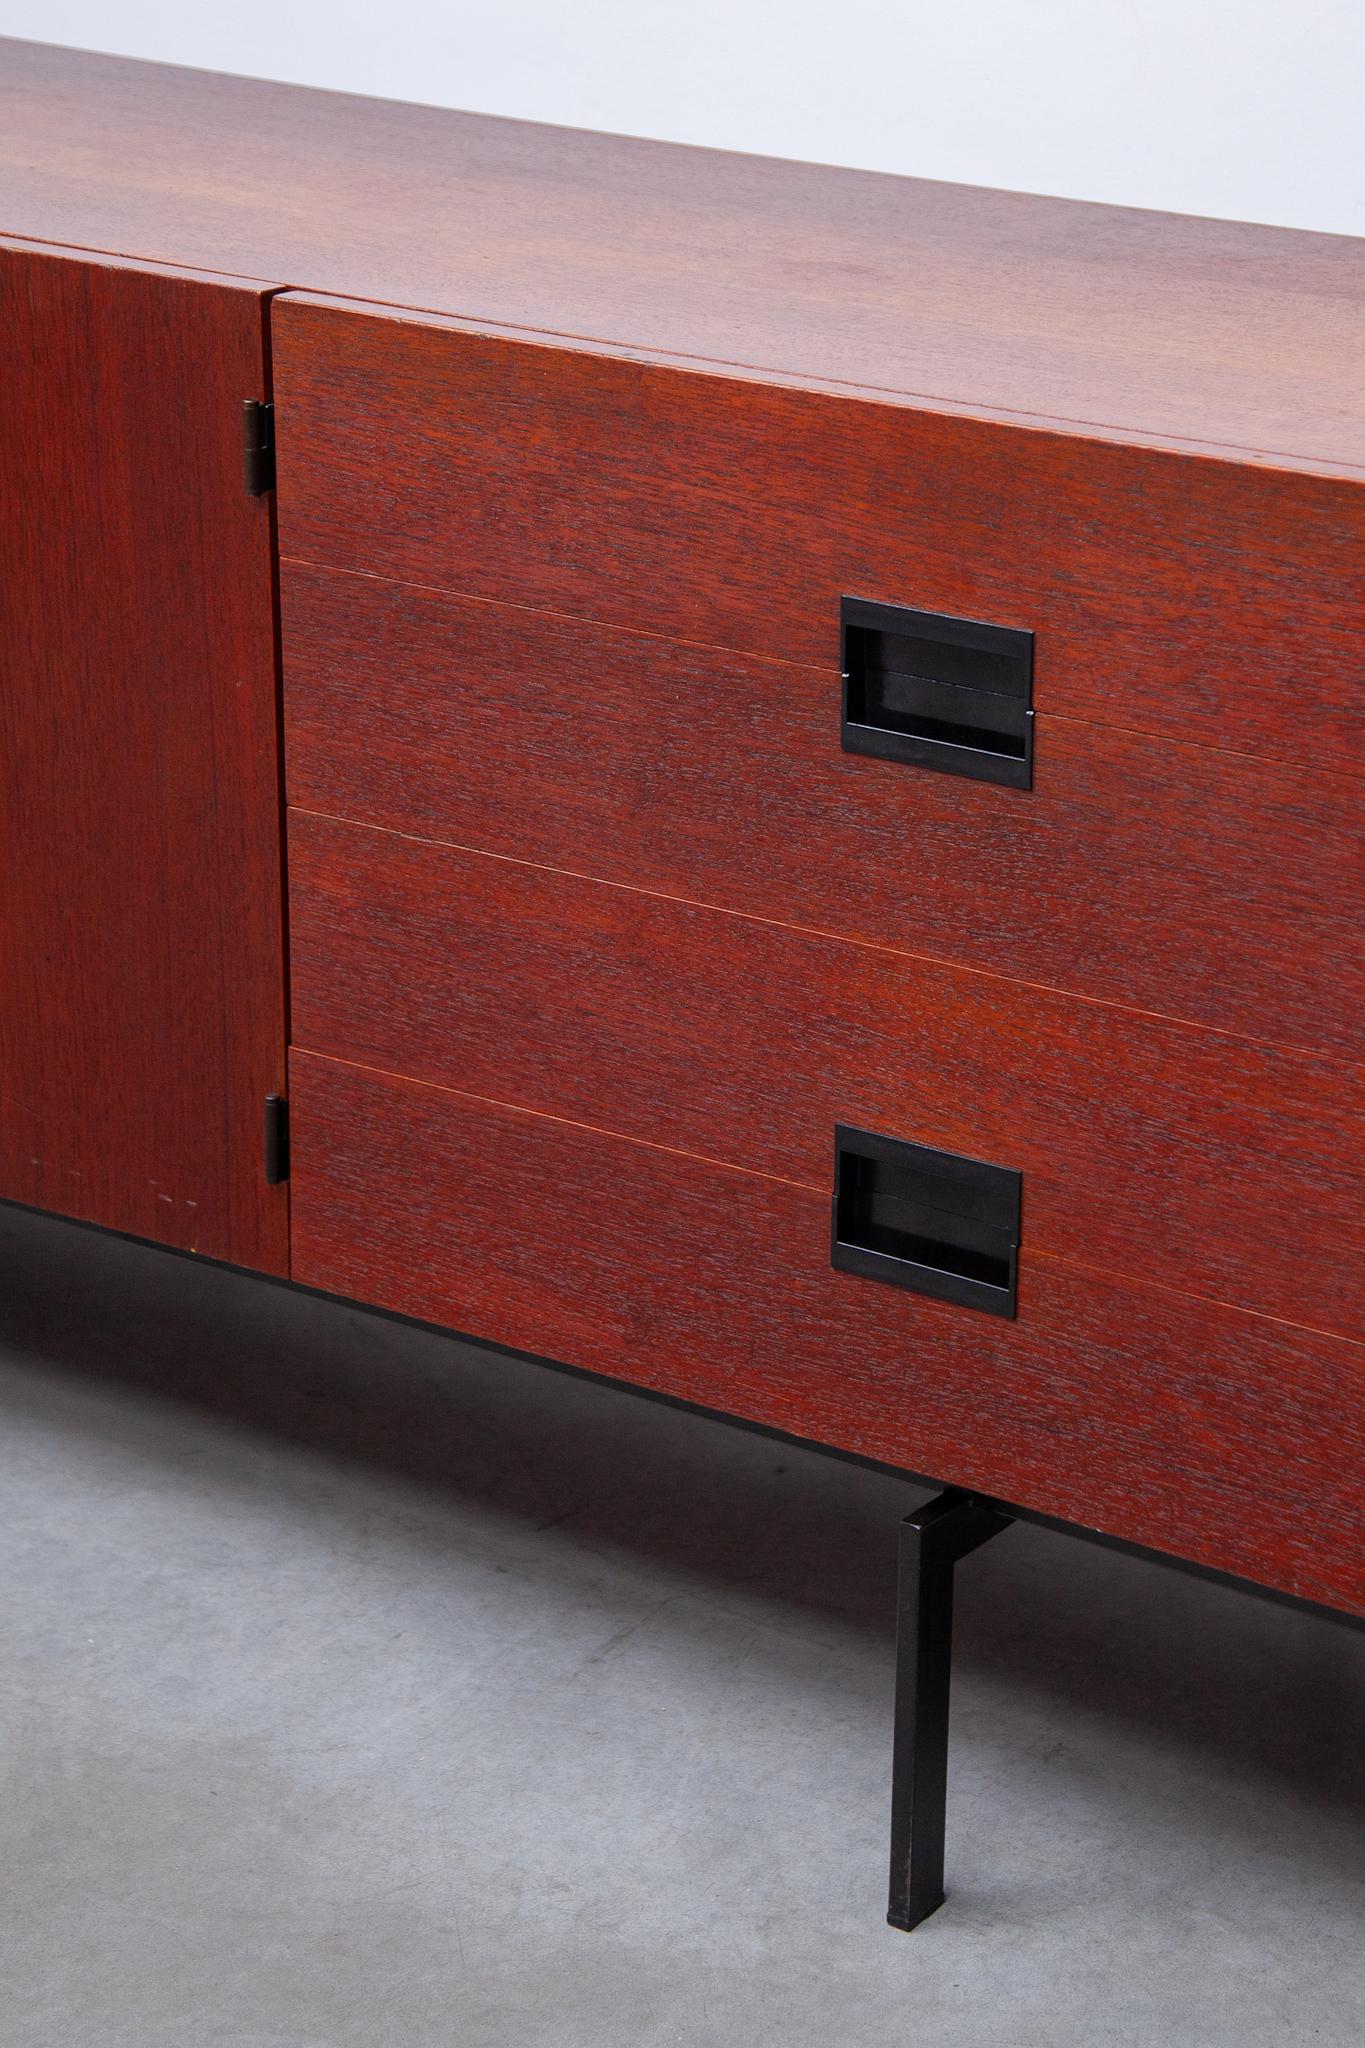 Hand-Crafted Japanese Serie DU03  Sideboard by Cees Braakman for Pastoe 1958, Dutch design For Sale